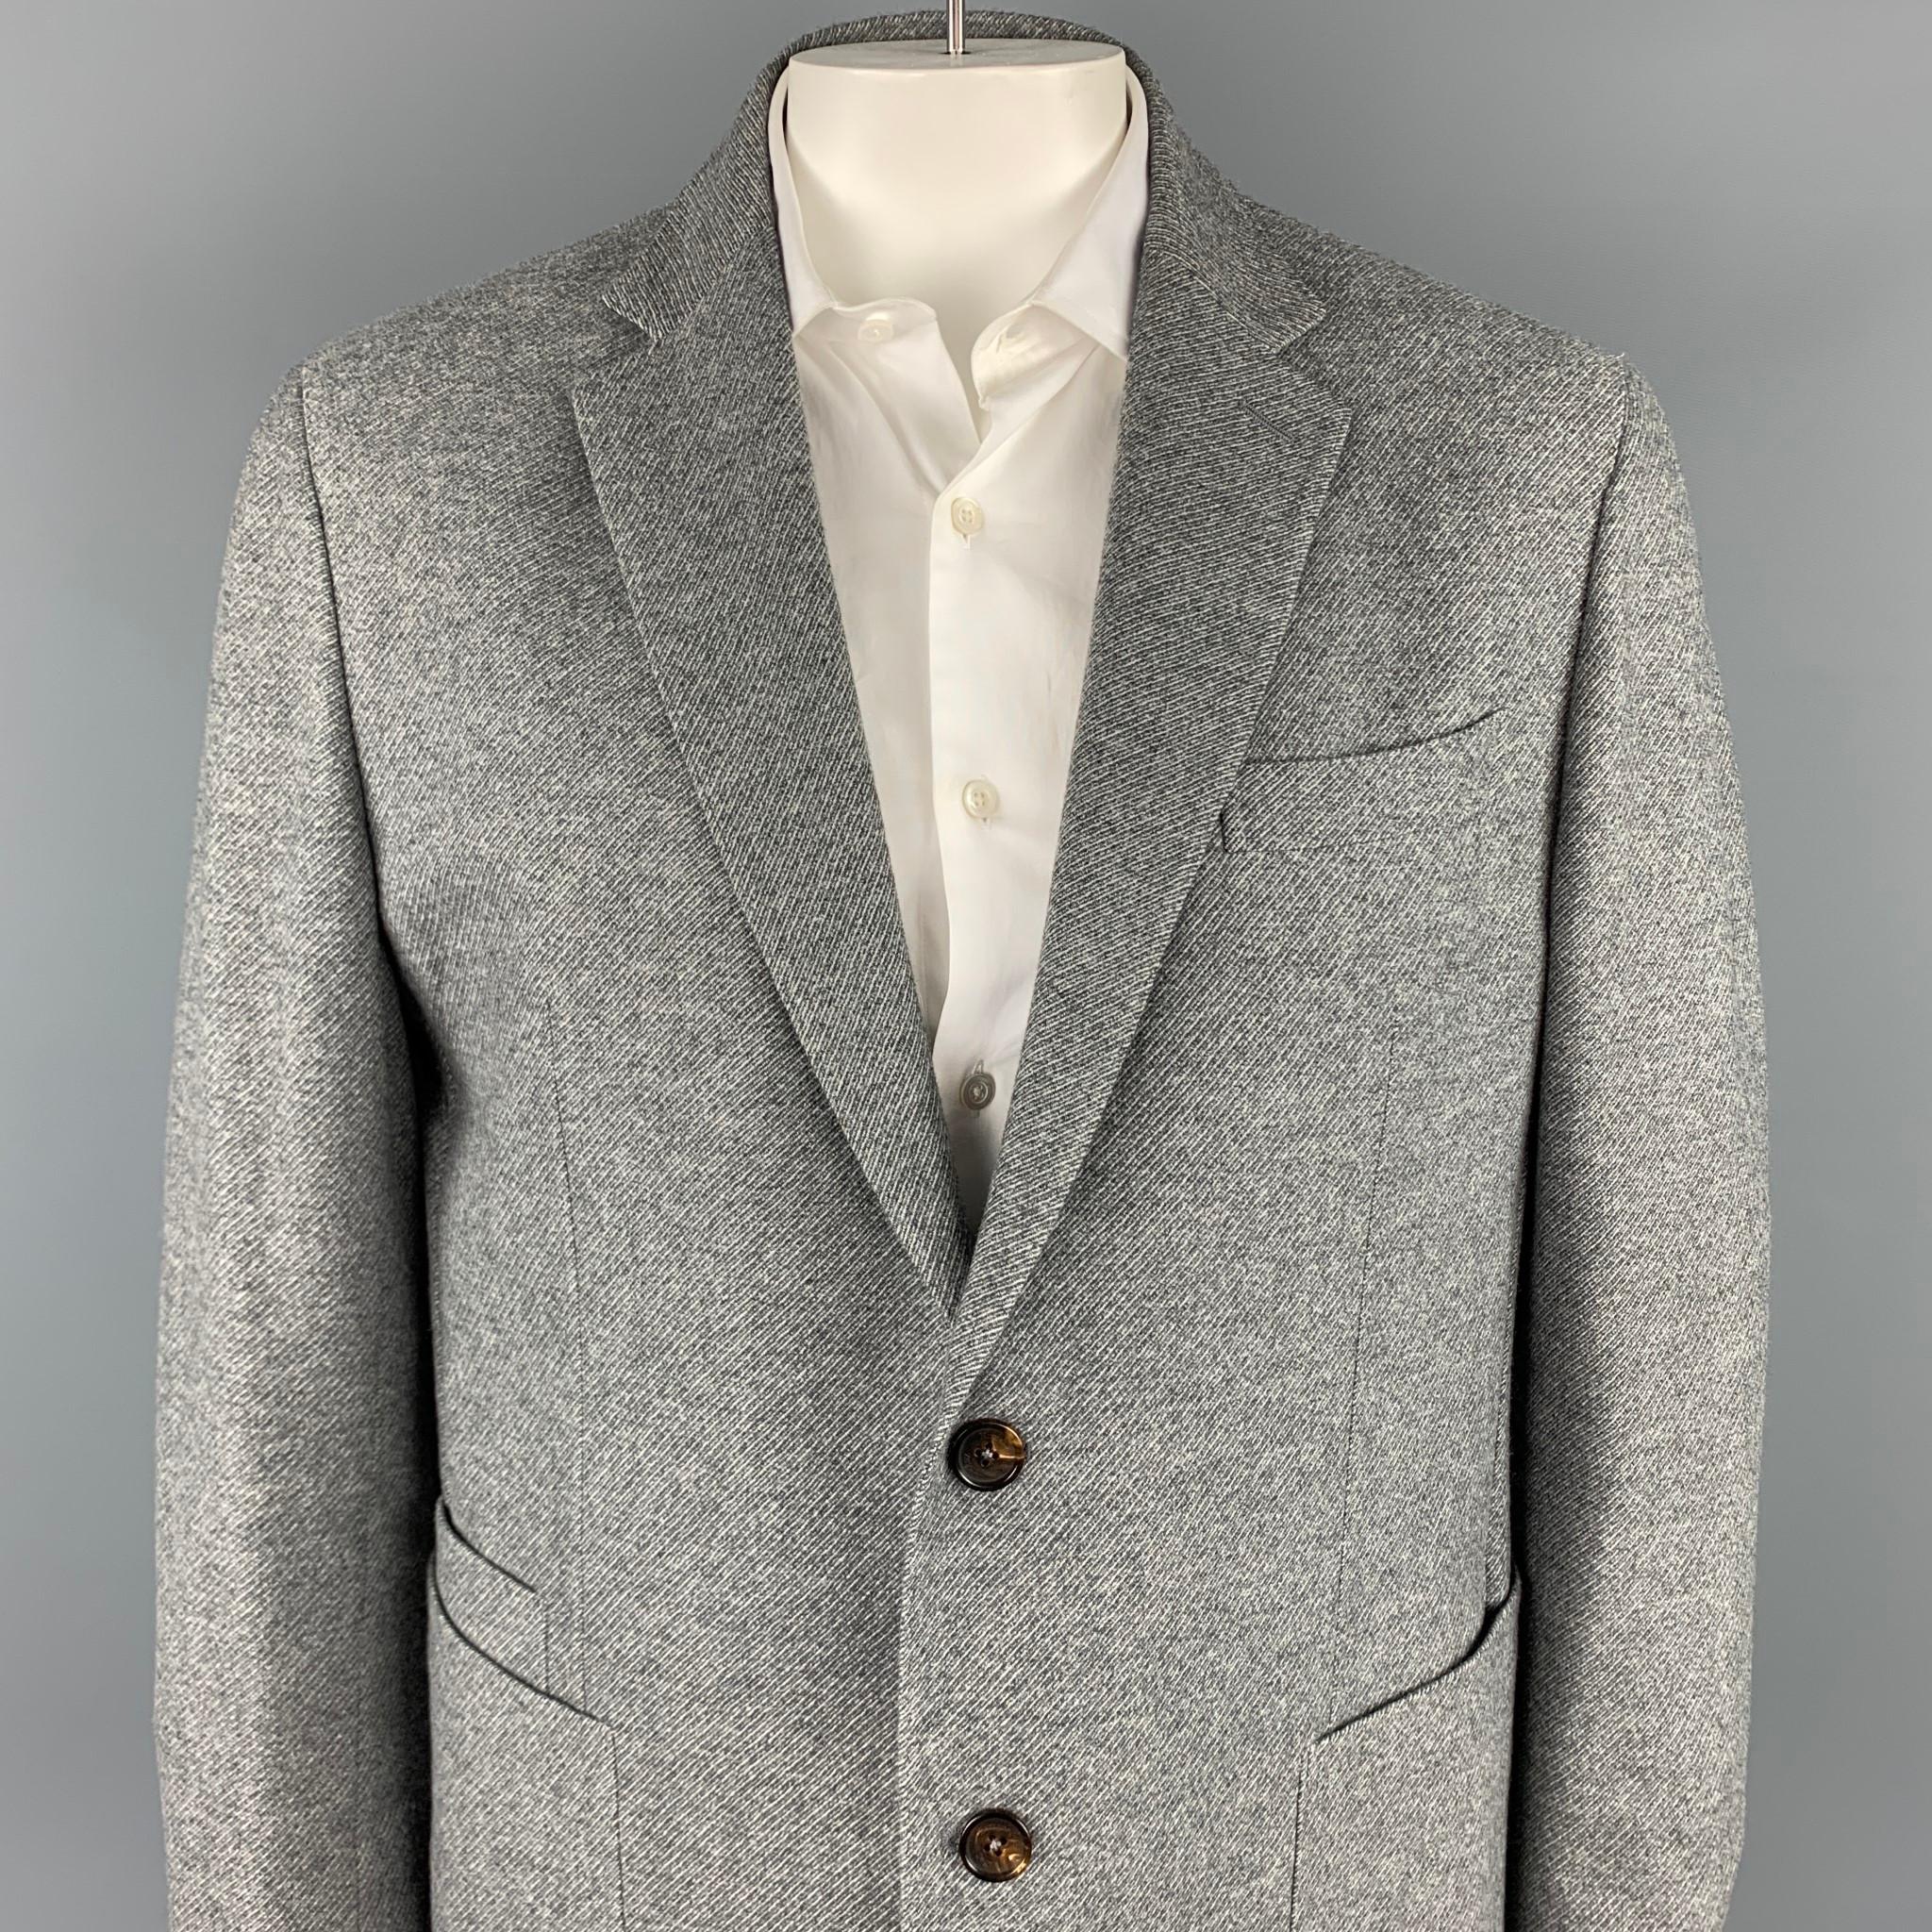 ERMENEGILDO ZEGNA sport coat comes in a grey heather wool / cashmere with a half liner featuring a notch lapel, patch pockets, and a two button closure. Made in Italy.

Very Good Pre-Owned Condition.
Marked: 58 R

Measurements:

Shoulder: 18.5